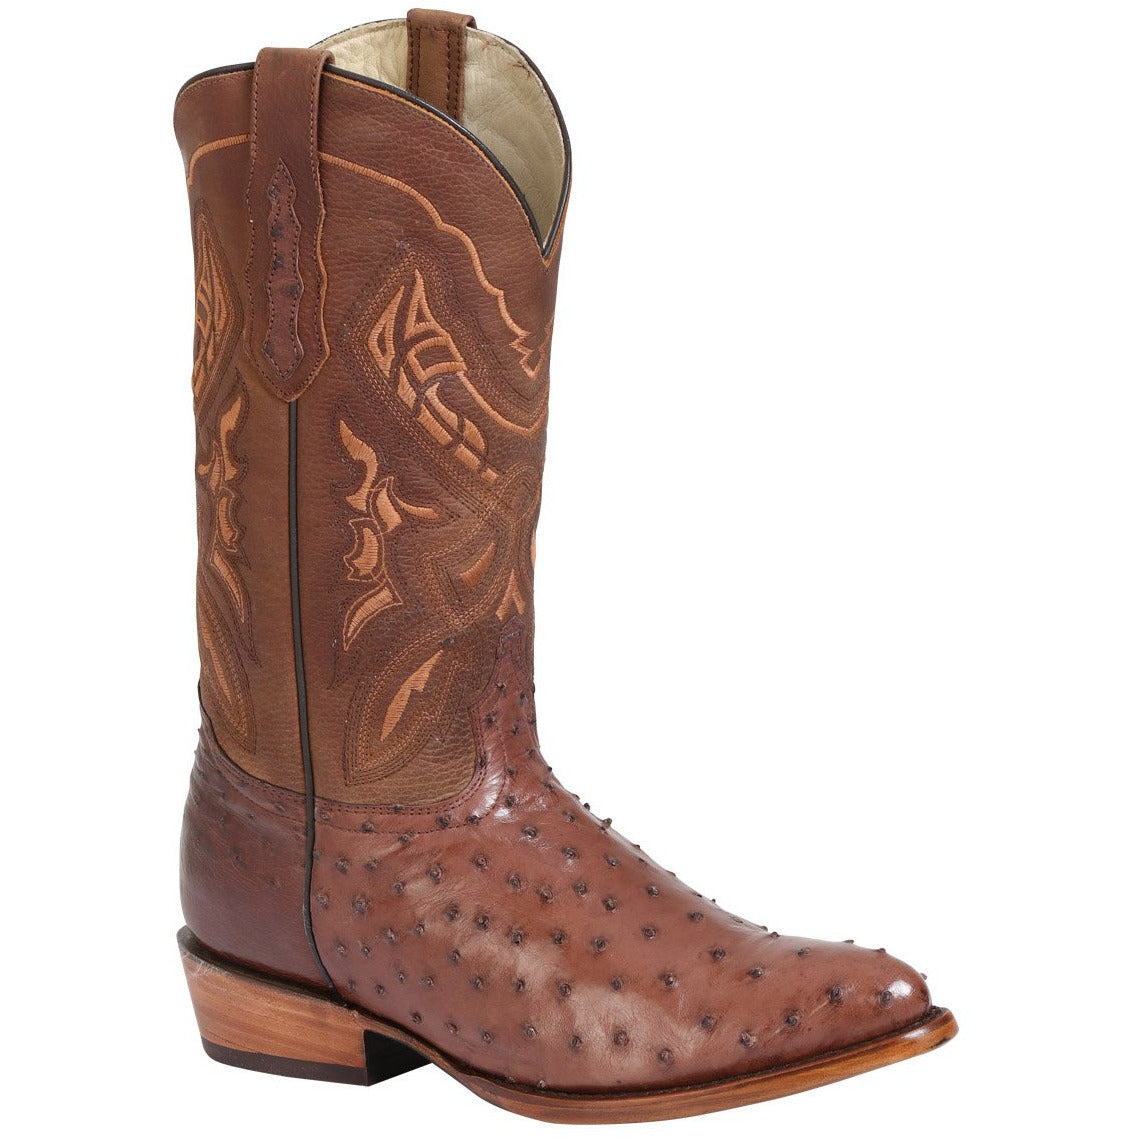 Men's 100 A√±os Ostrich Boots Medium Round Toe Handcrafted - yeehawcowboy